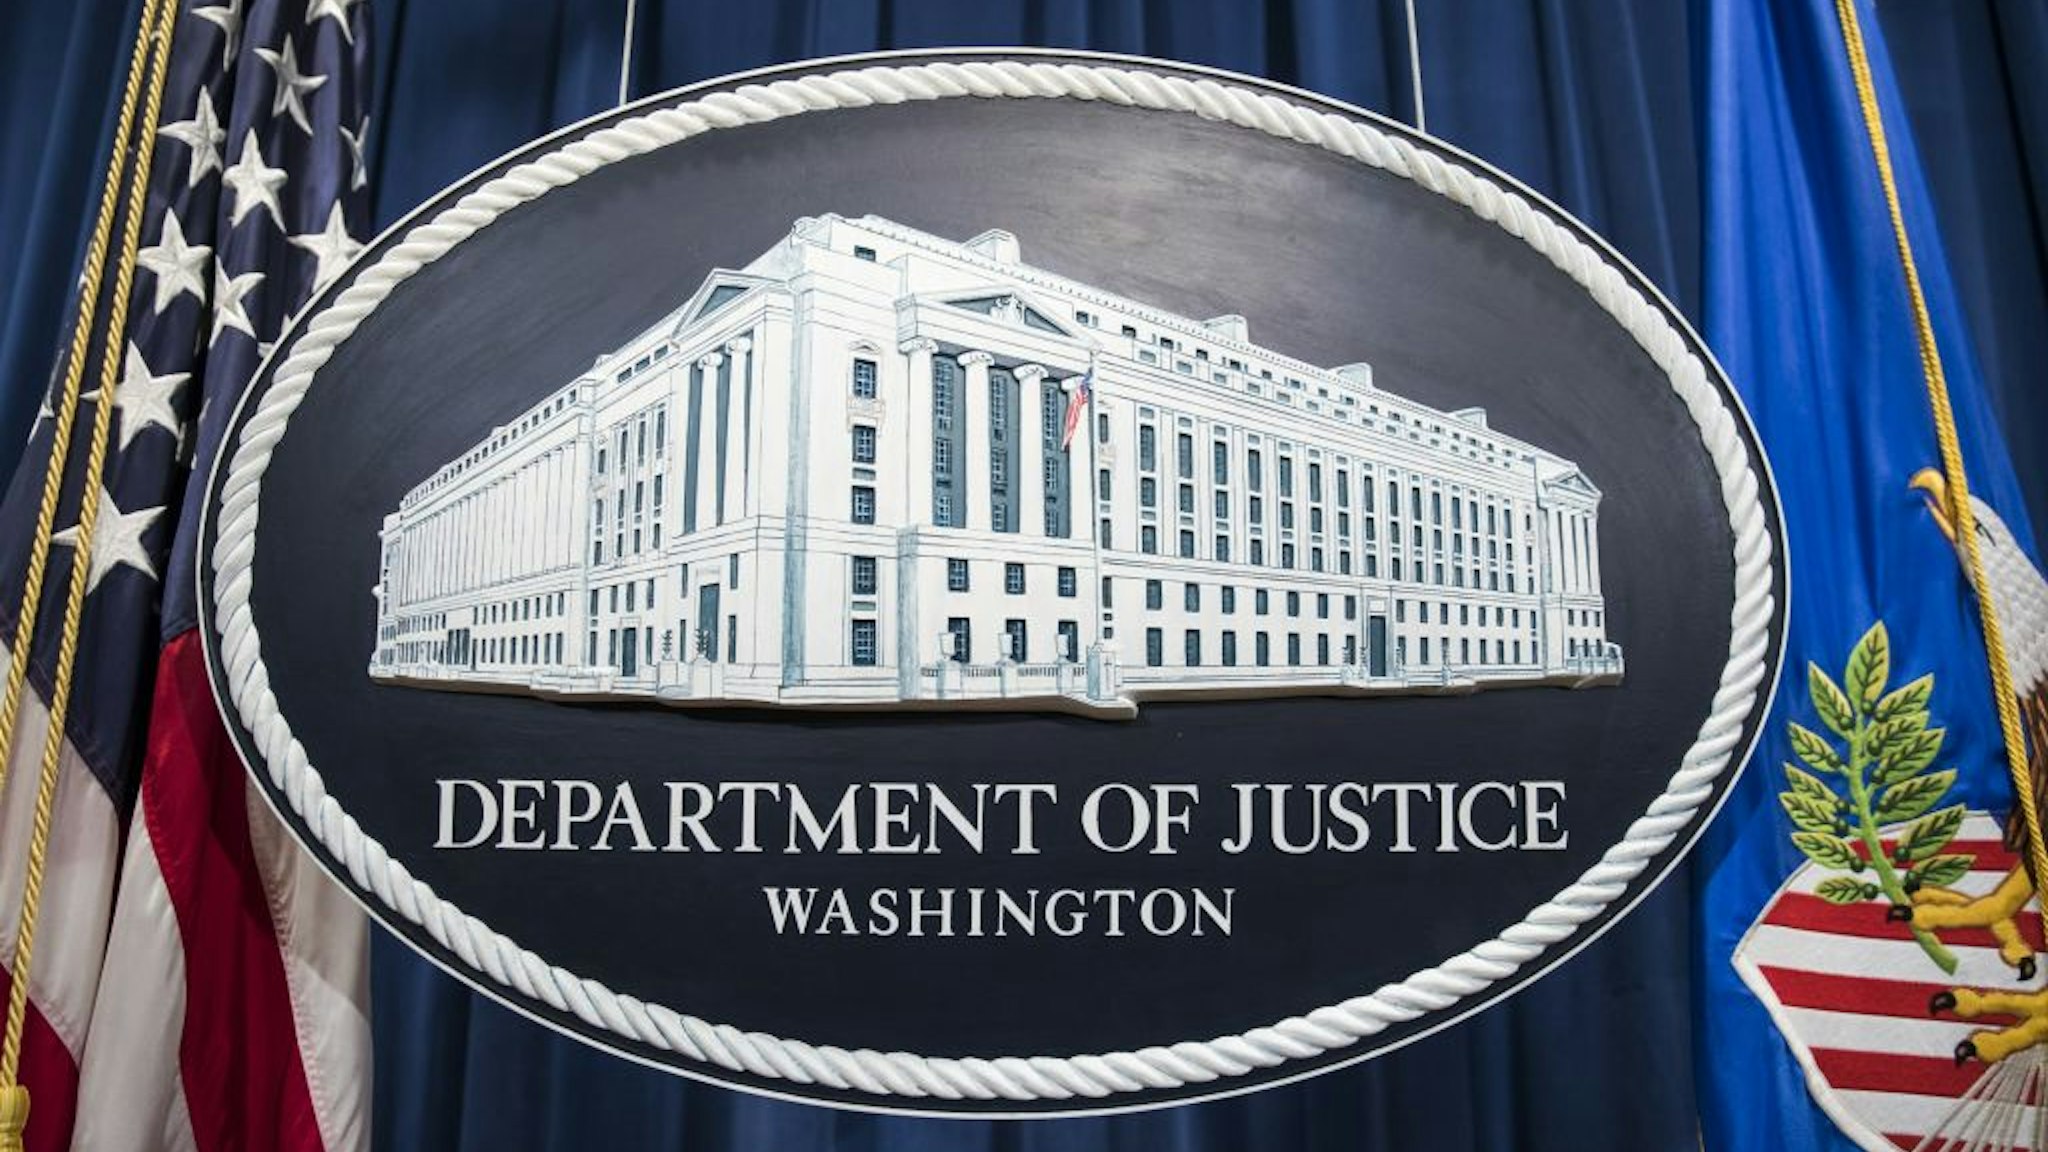 The Department of Justice logo hangs as the backdrop before a press conference held by Attorney General Jeff Sessions on leaks of classified material threatening national security in Washington, USA on August 4, 2017.